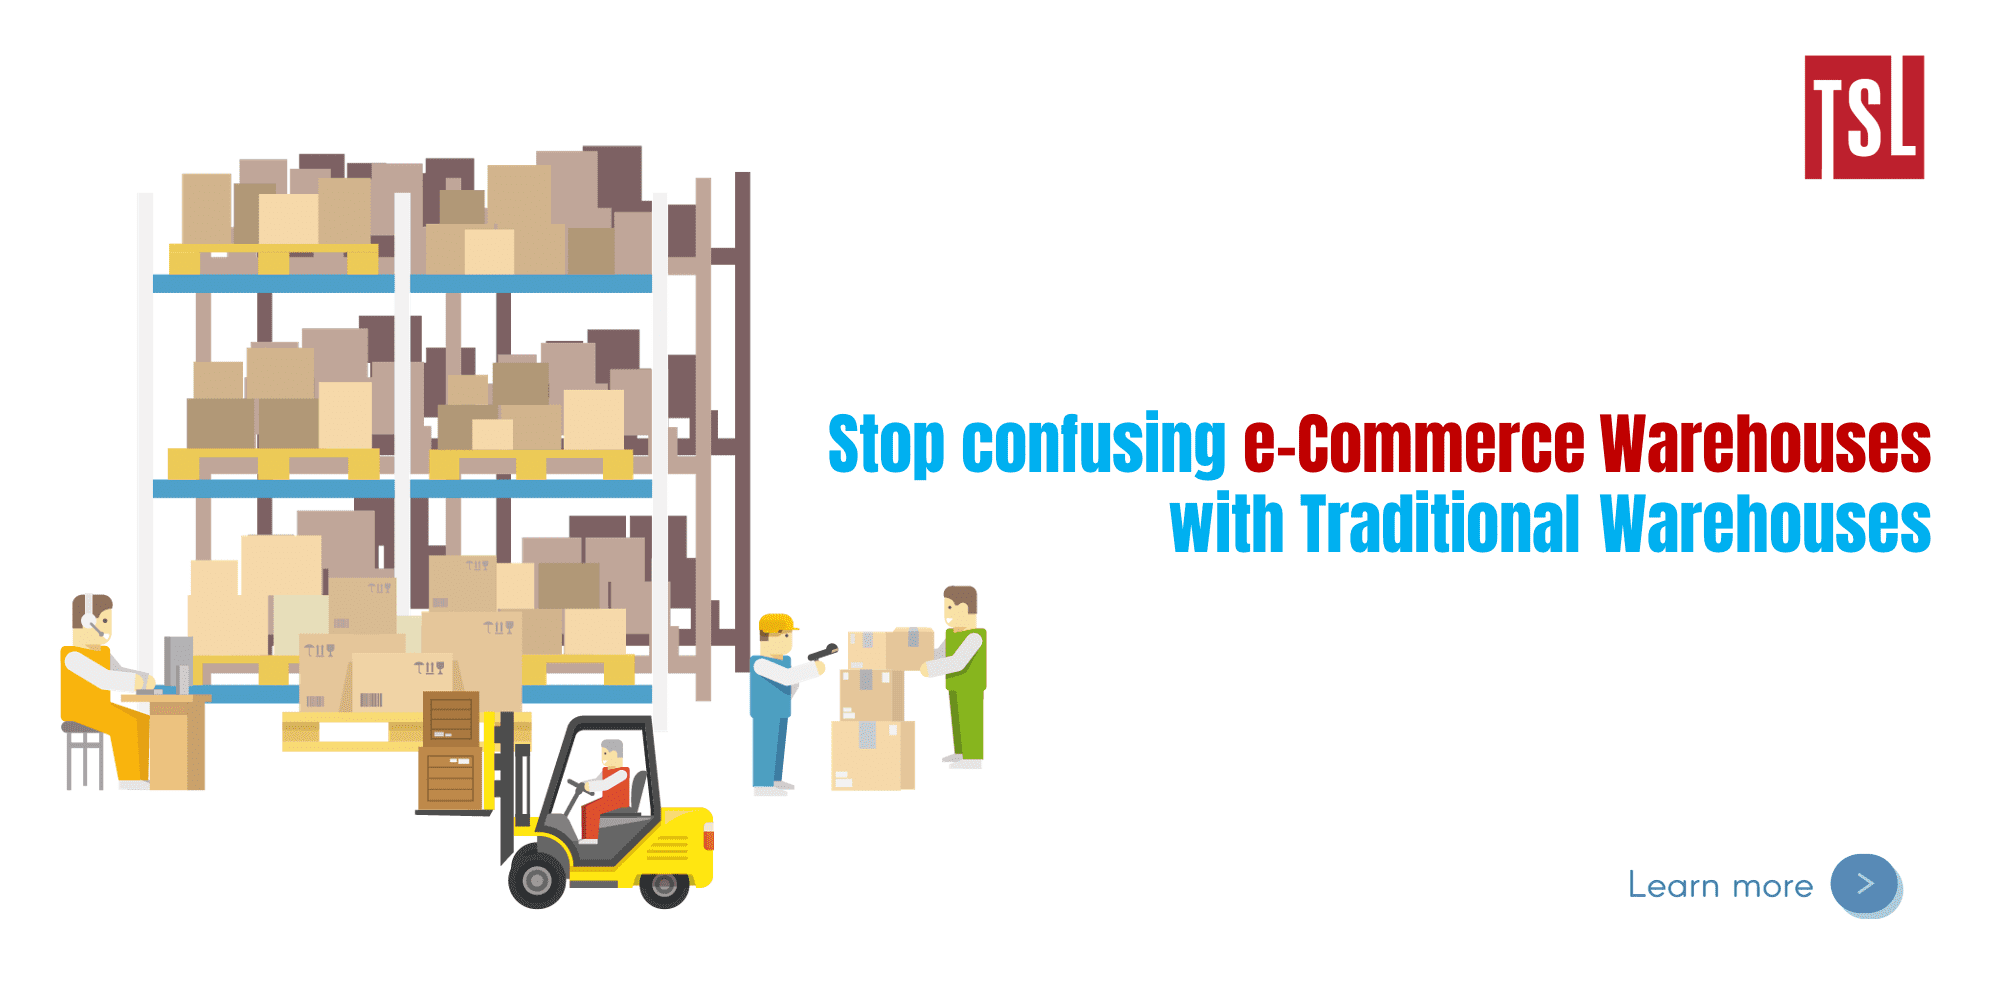 Stop confusing e-Commerce Warehouses with Traditional Warehouses!